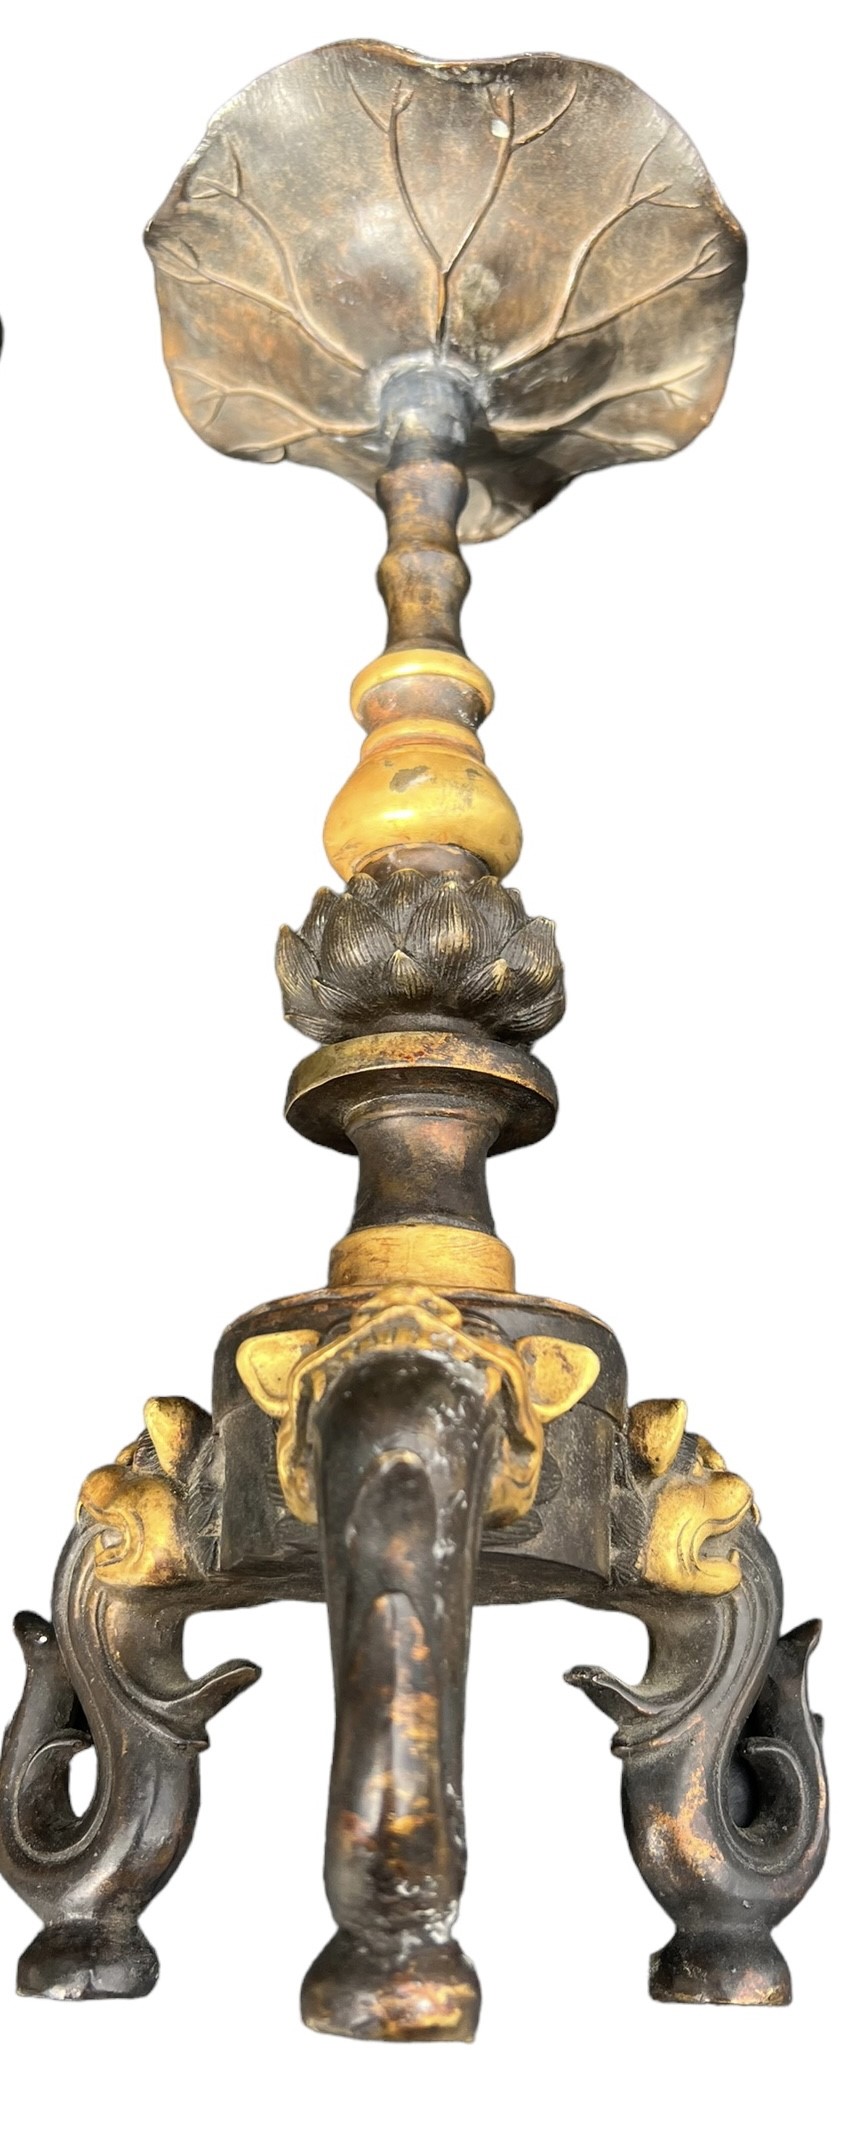 A PAIR OF CHINESE GILT BRONZE TABLE PRICKET STANDS The columns decorated with Lotus Leaf above three - Image 7 of 7